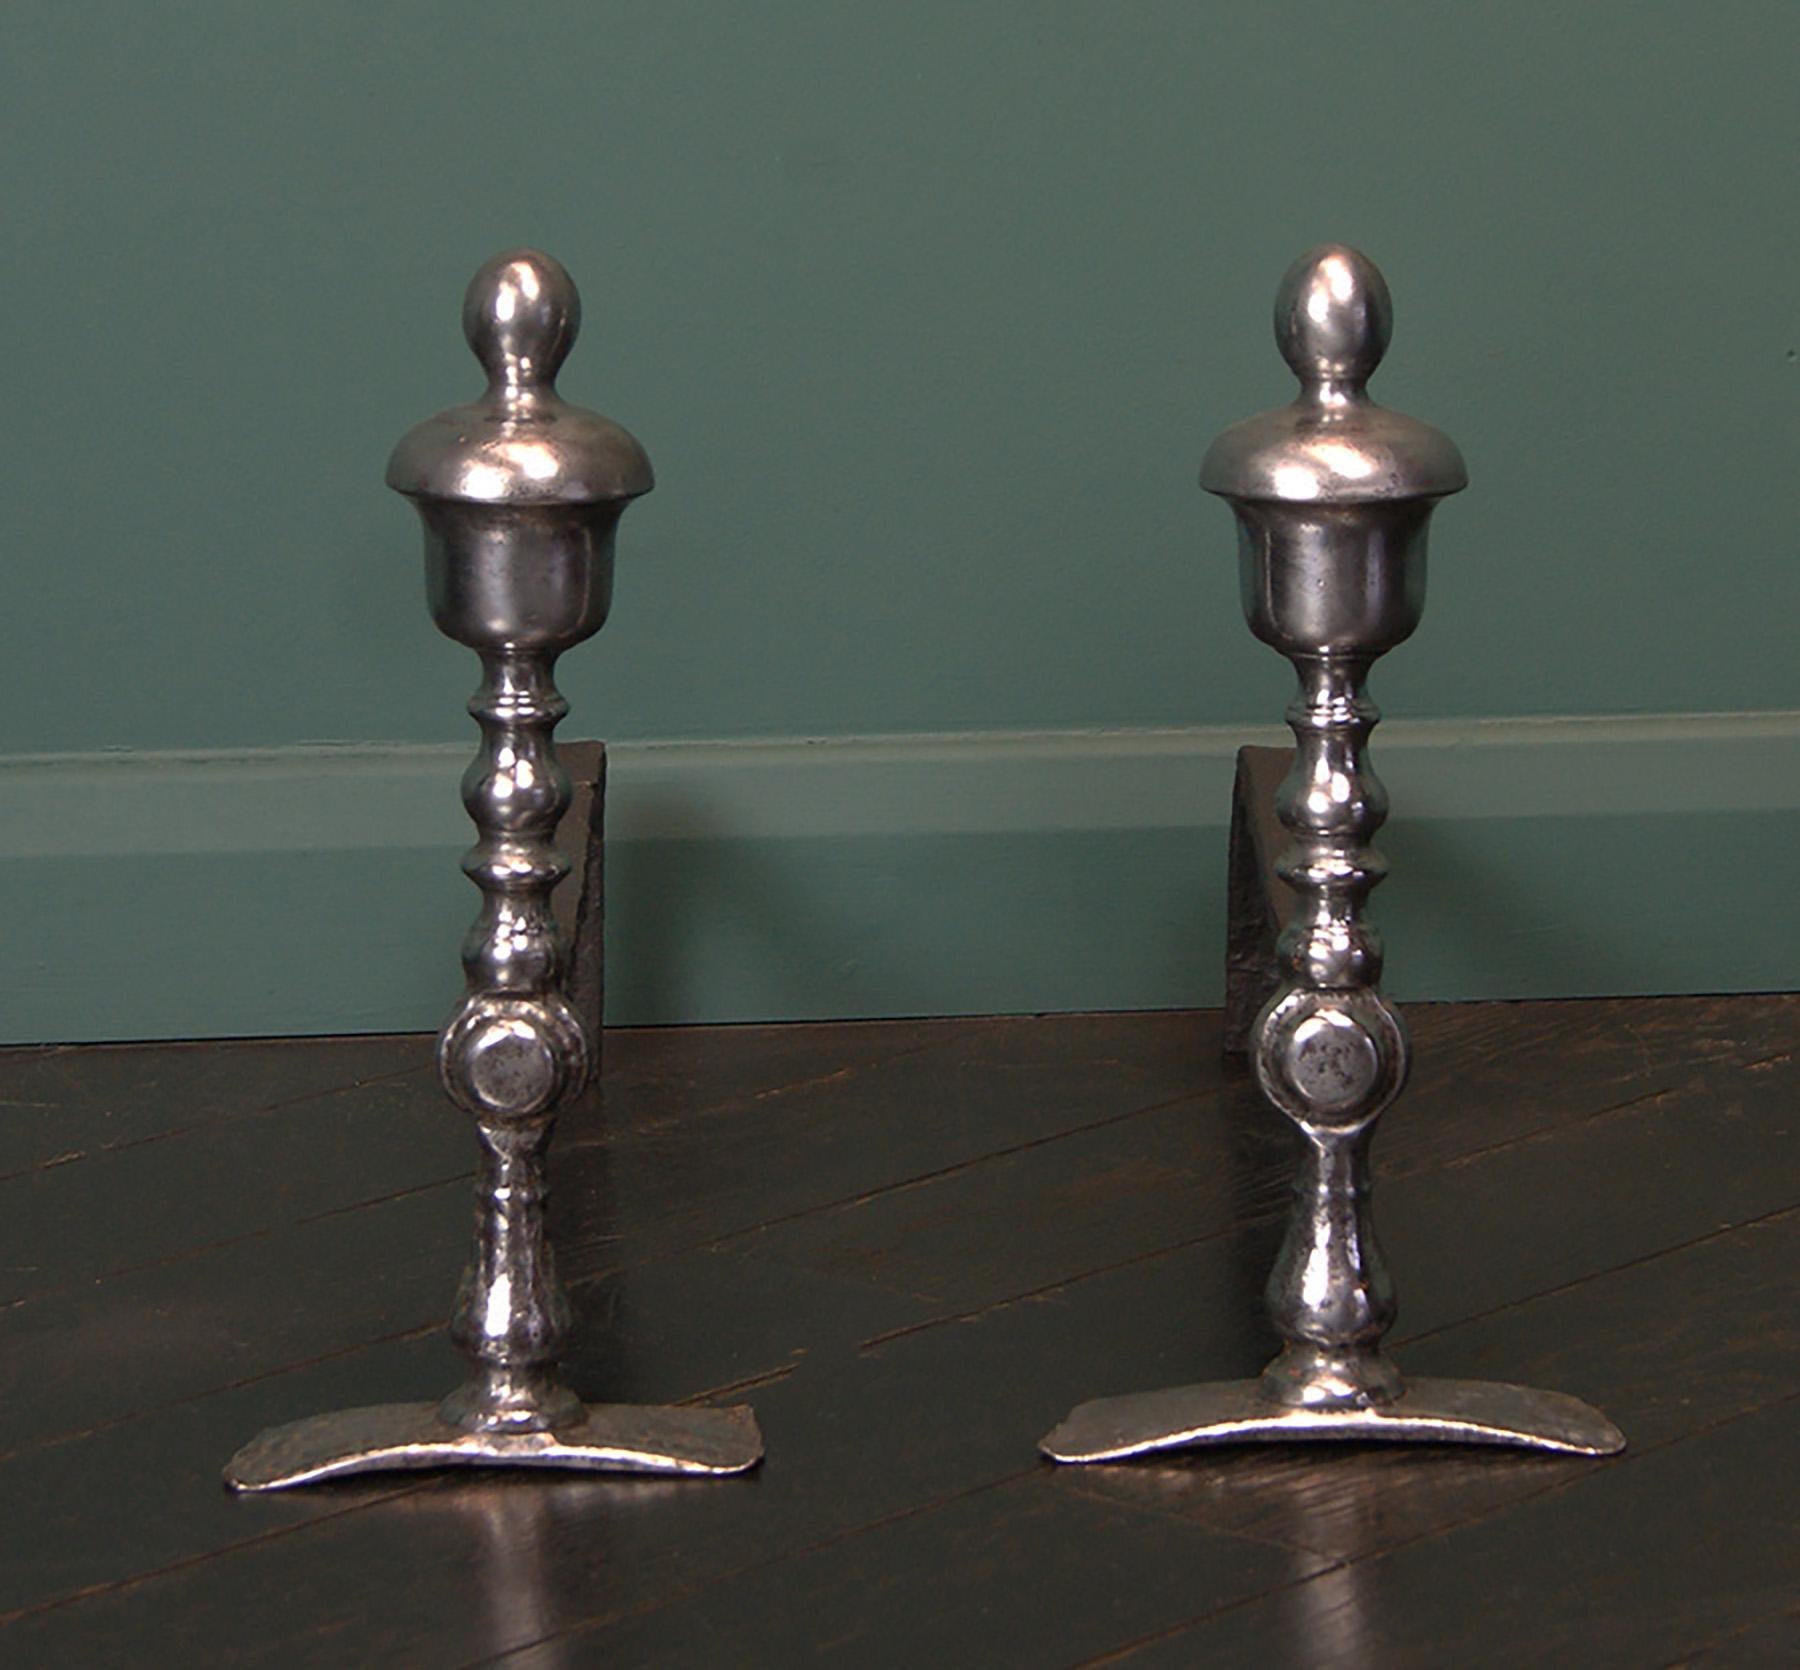 An early 18th century pair of English fireplace wrought-iron fire dogs. The wrought standards with heavy urn finials are riveted through with deeply veined paterna to rear log supports.  Restored.
Circa 1710